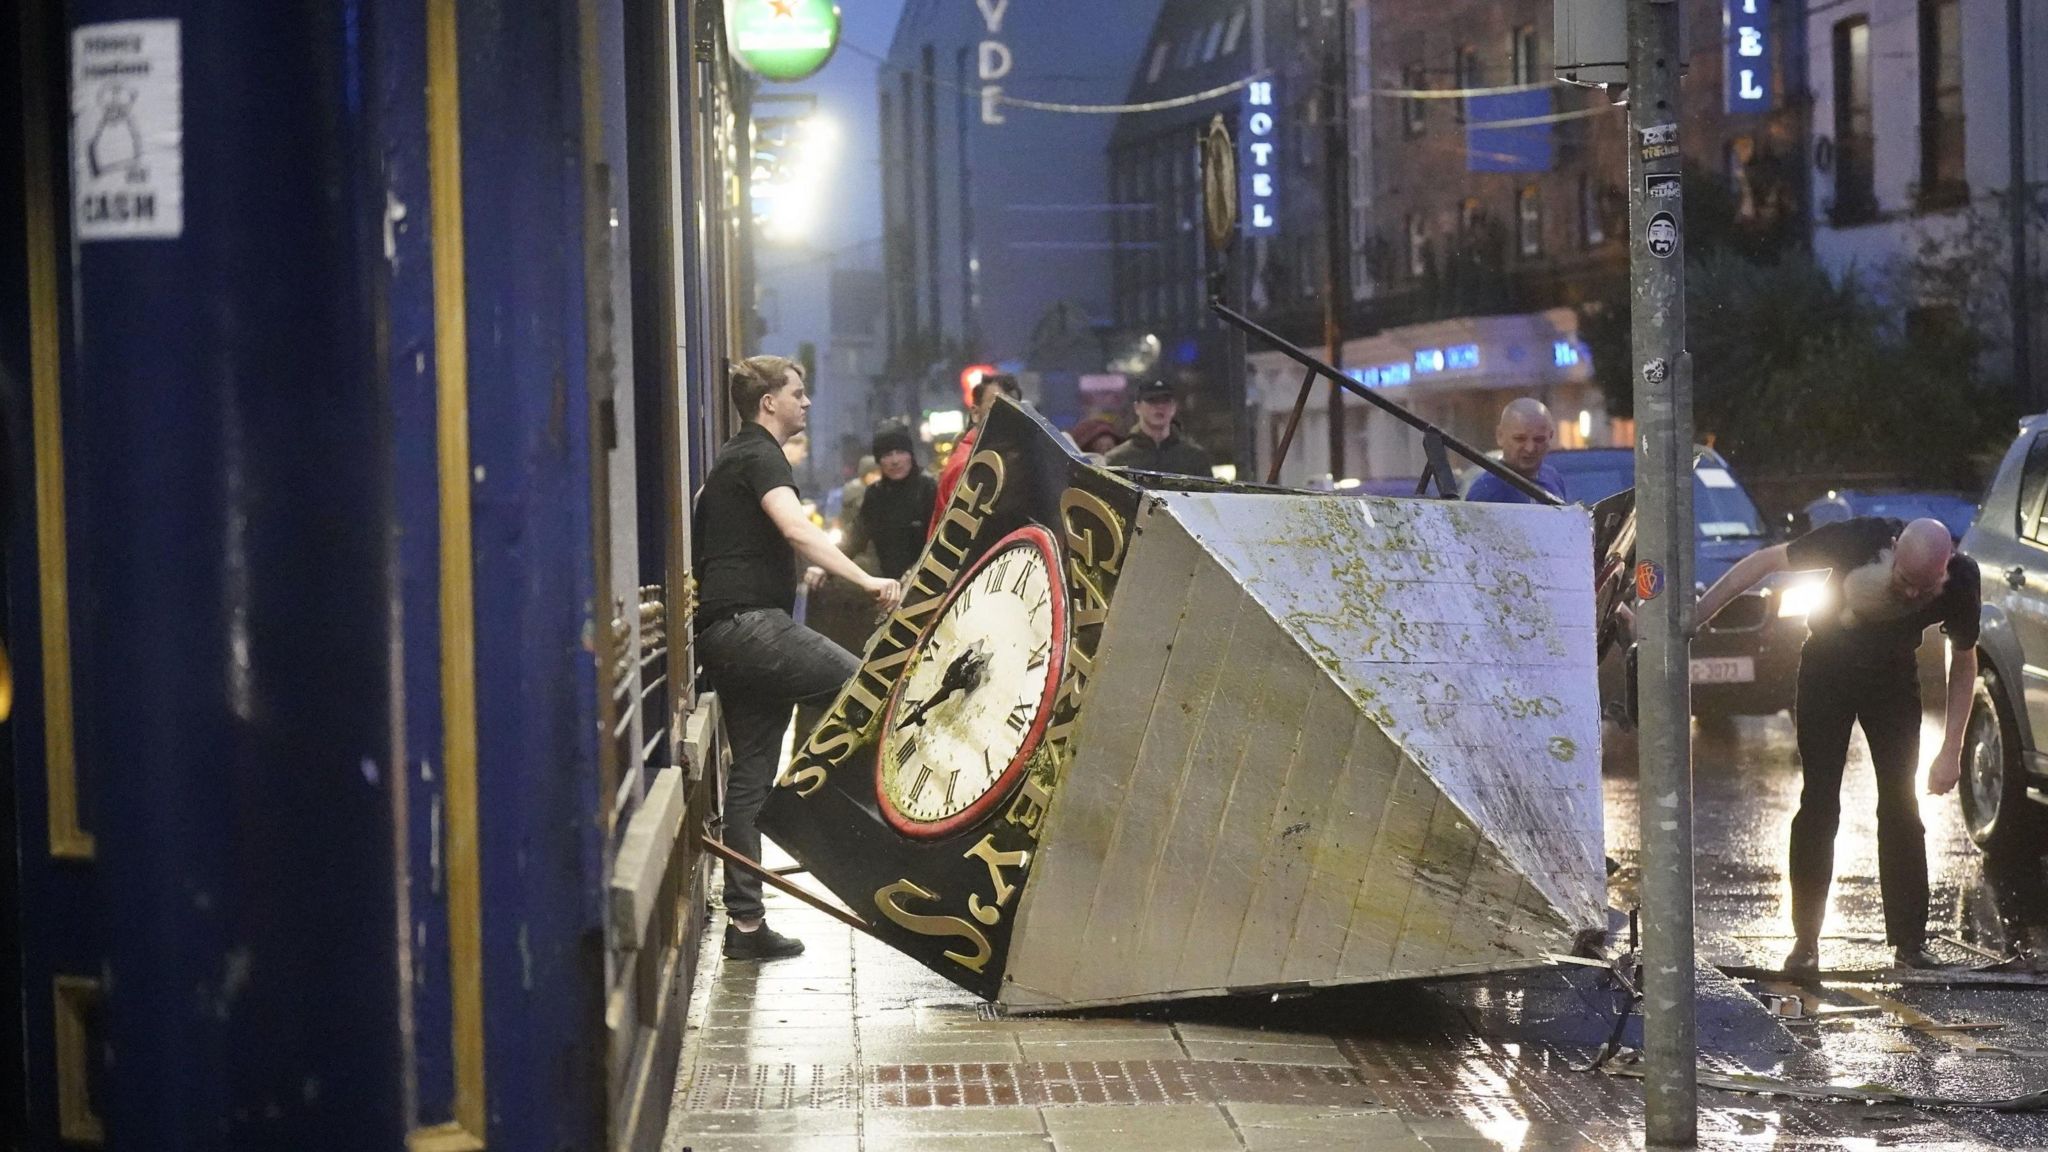  A clock tower falls to the ground in Eyre Square, Galway, during Storm Isha. A Status Red wind warning has been issued for counties Donegal, Galway and Mayo as authorities warn people to take care ahead of Storm Isha's a